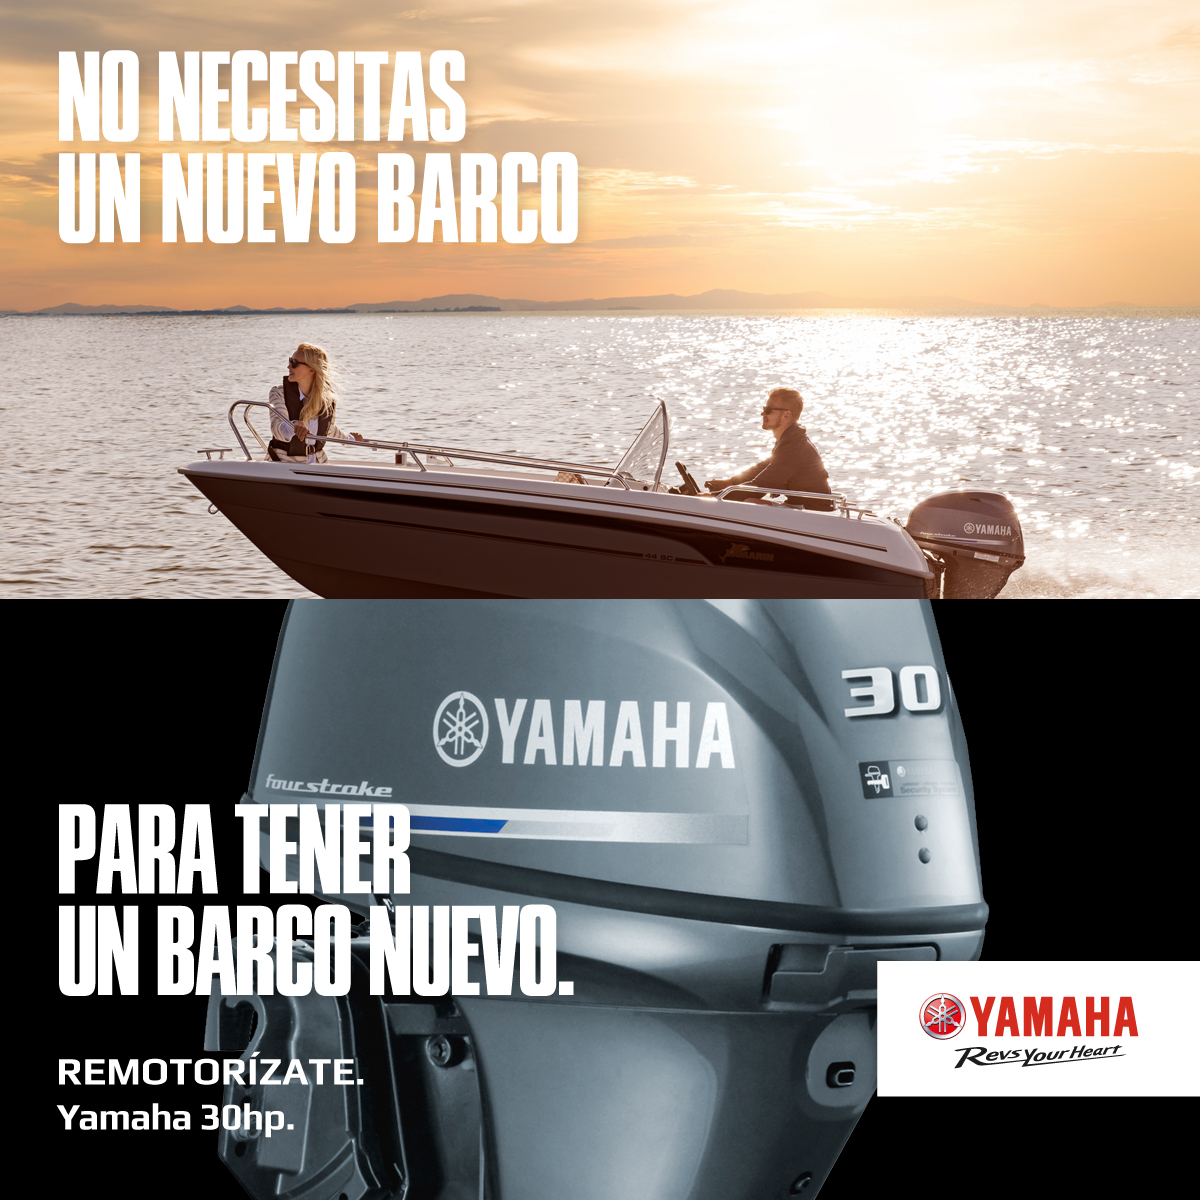 Renew your outboard motor now